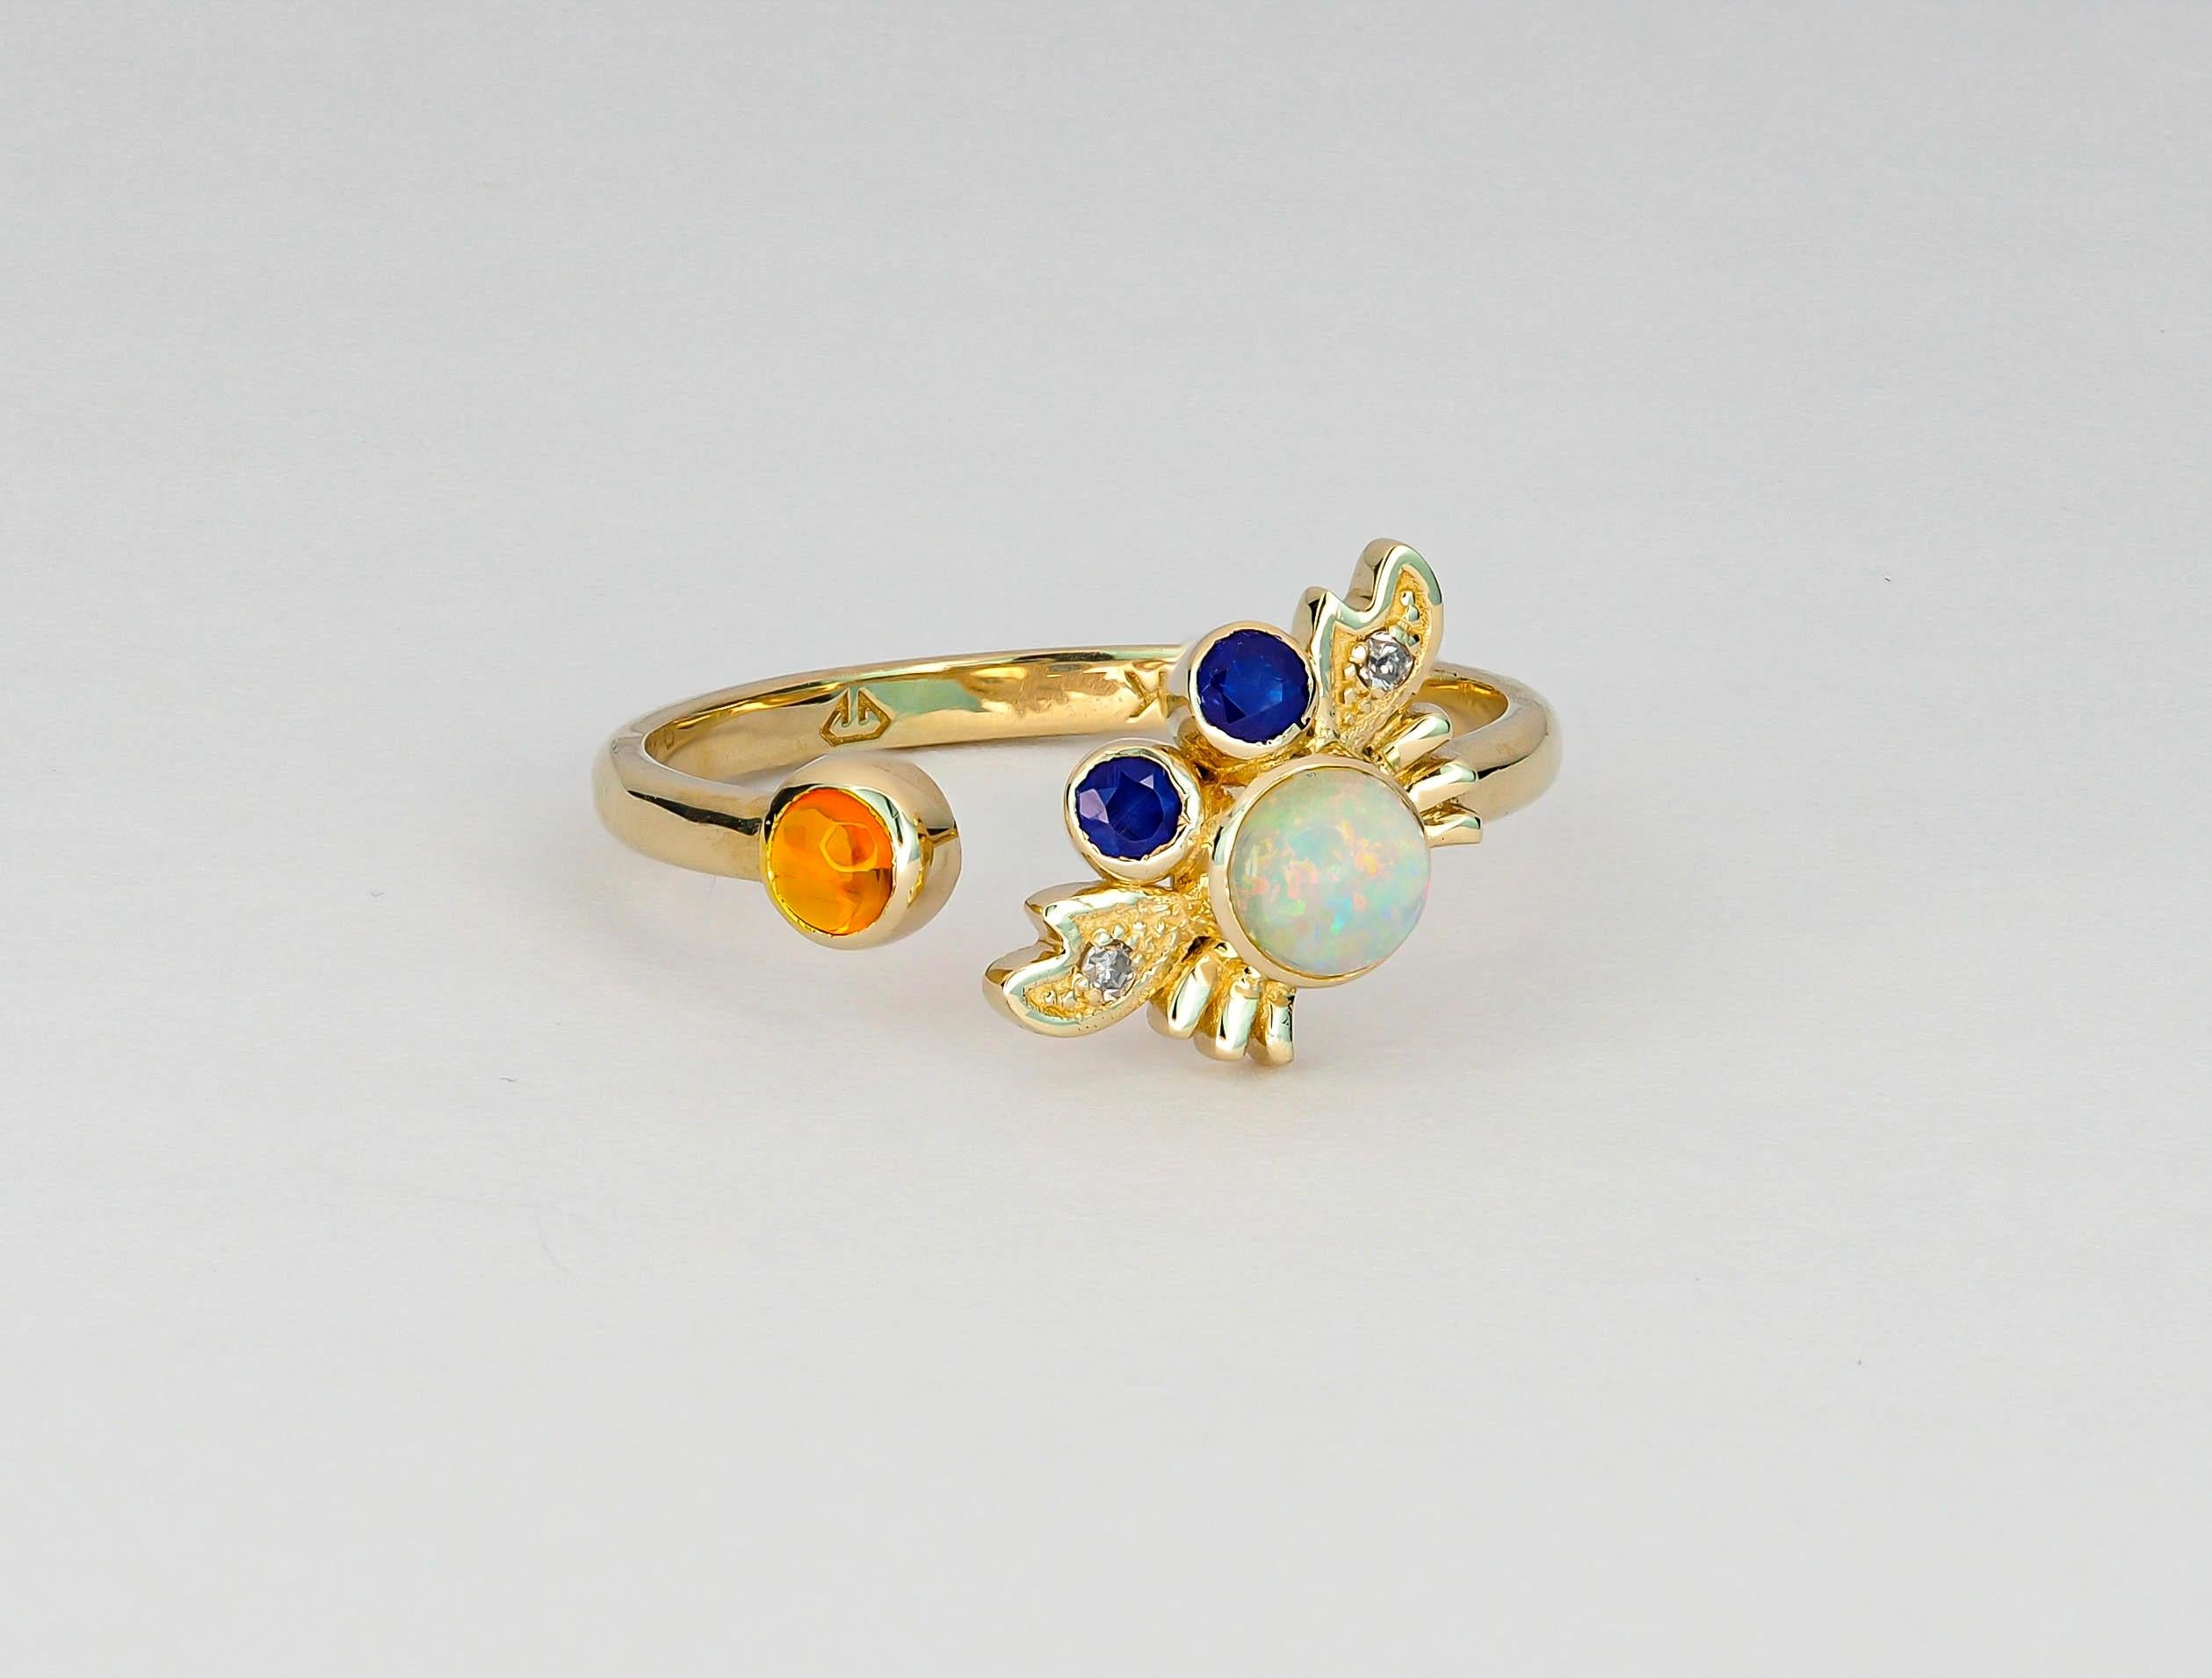 14 kt solid gold Funny crab ring with natural opal, sapphires and diamonds. 
Weight: 1.95 g. 

Gemstones:
1. Natural opal: weight - 0.45 ct in total, color - multi colors, cabochon cut, 4.3 mm.
Clarity: Translucent  
2. Natural sapphire: weight -